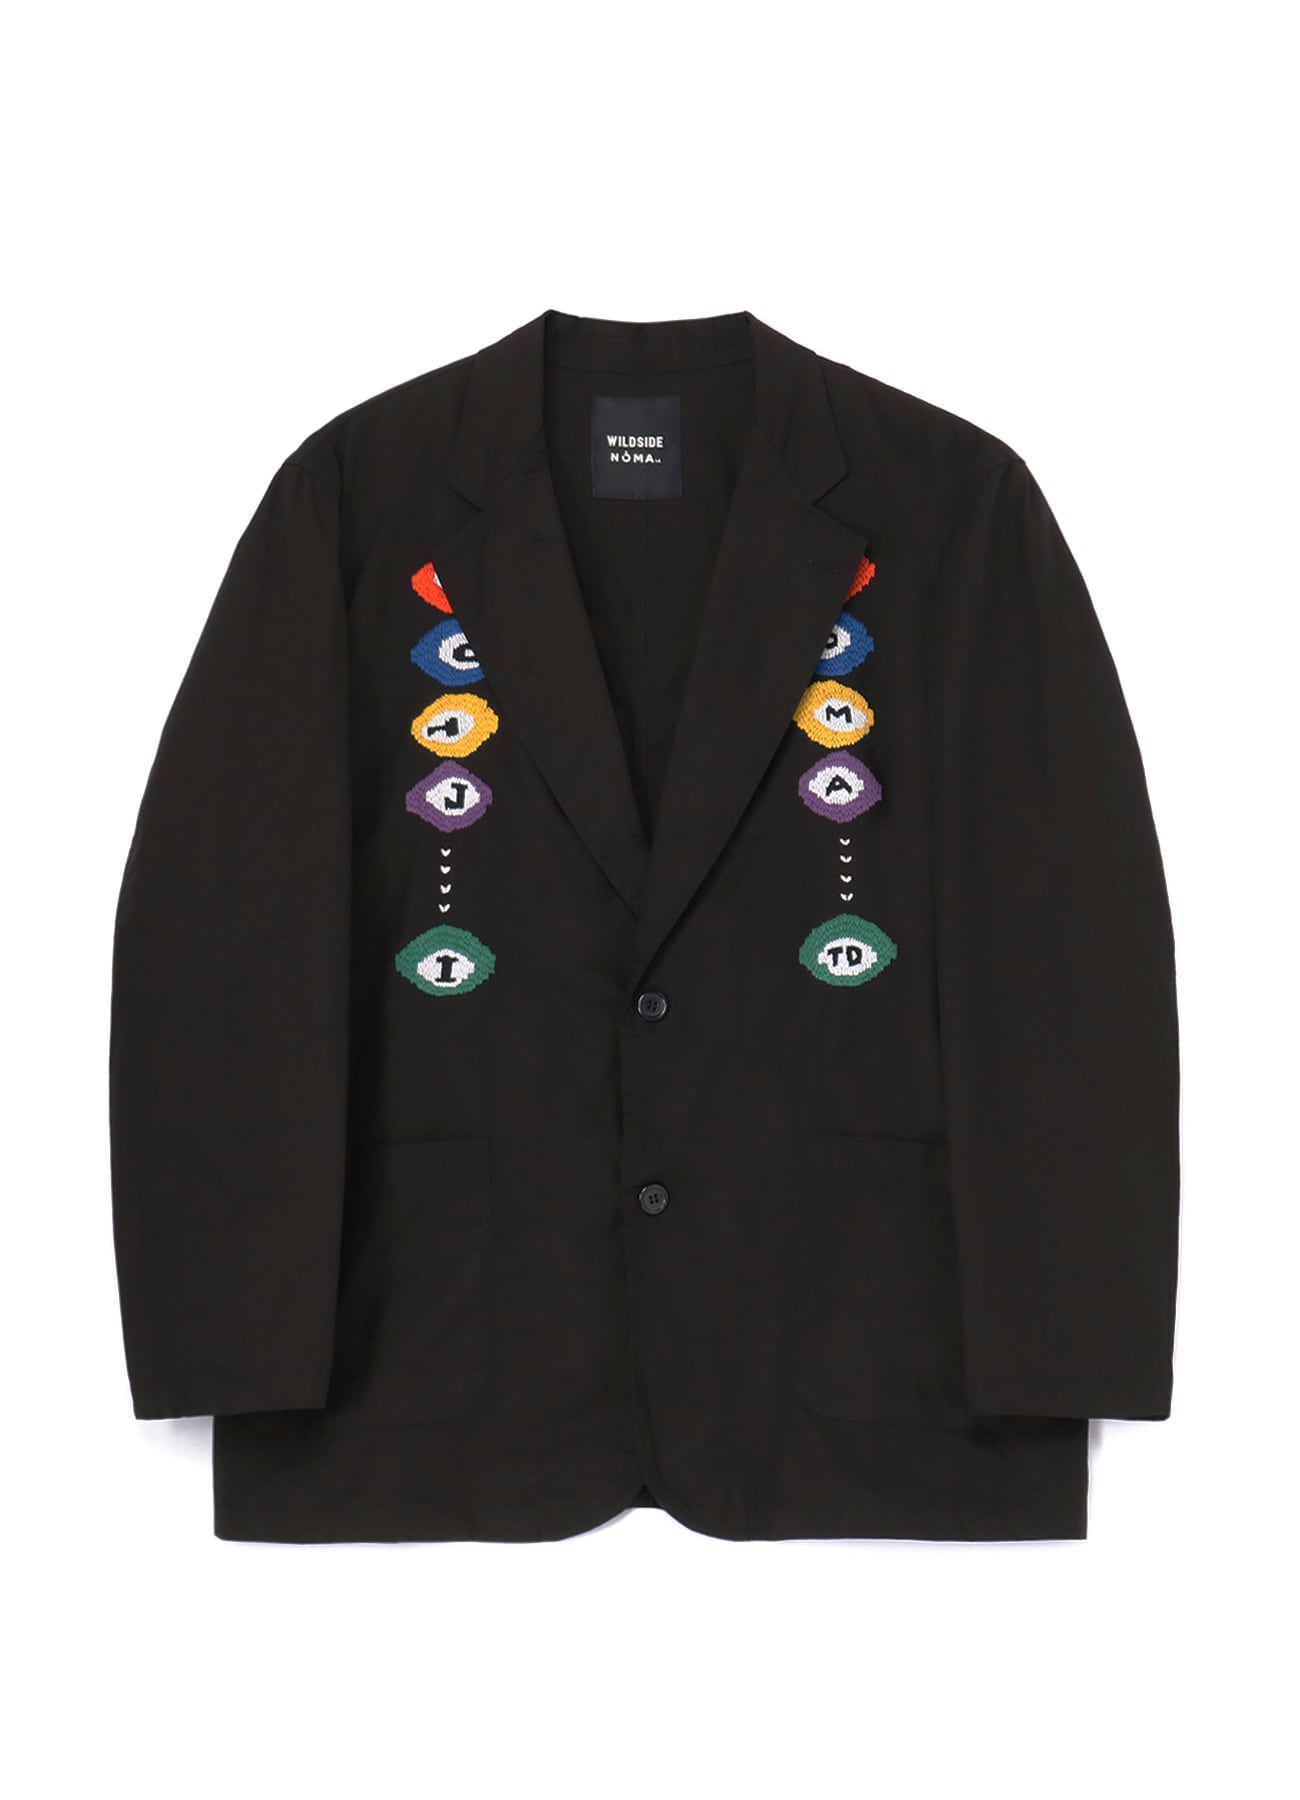 WILDSIDE × NOMA t.d. BILLIARDS HAND EMBROIDERY JACKET